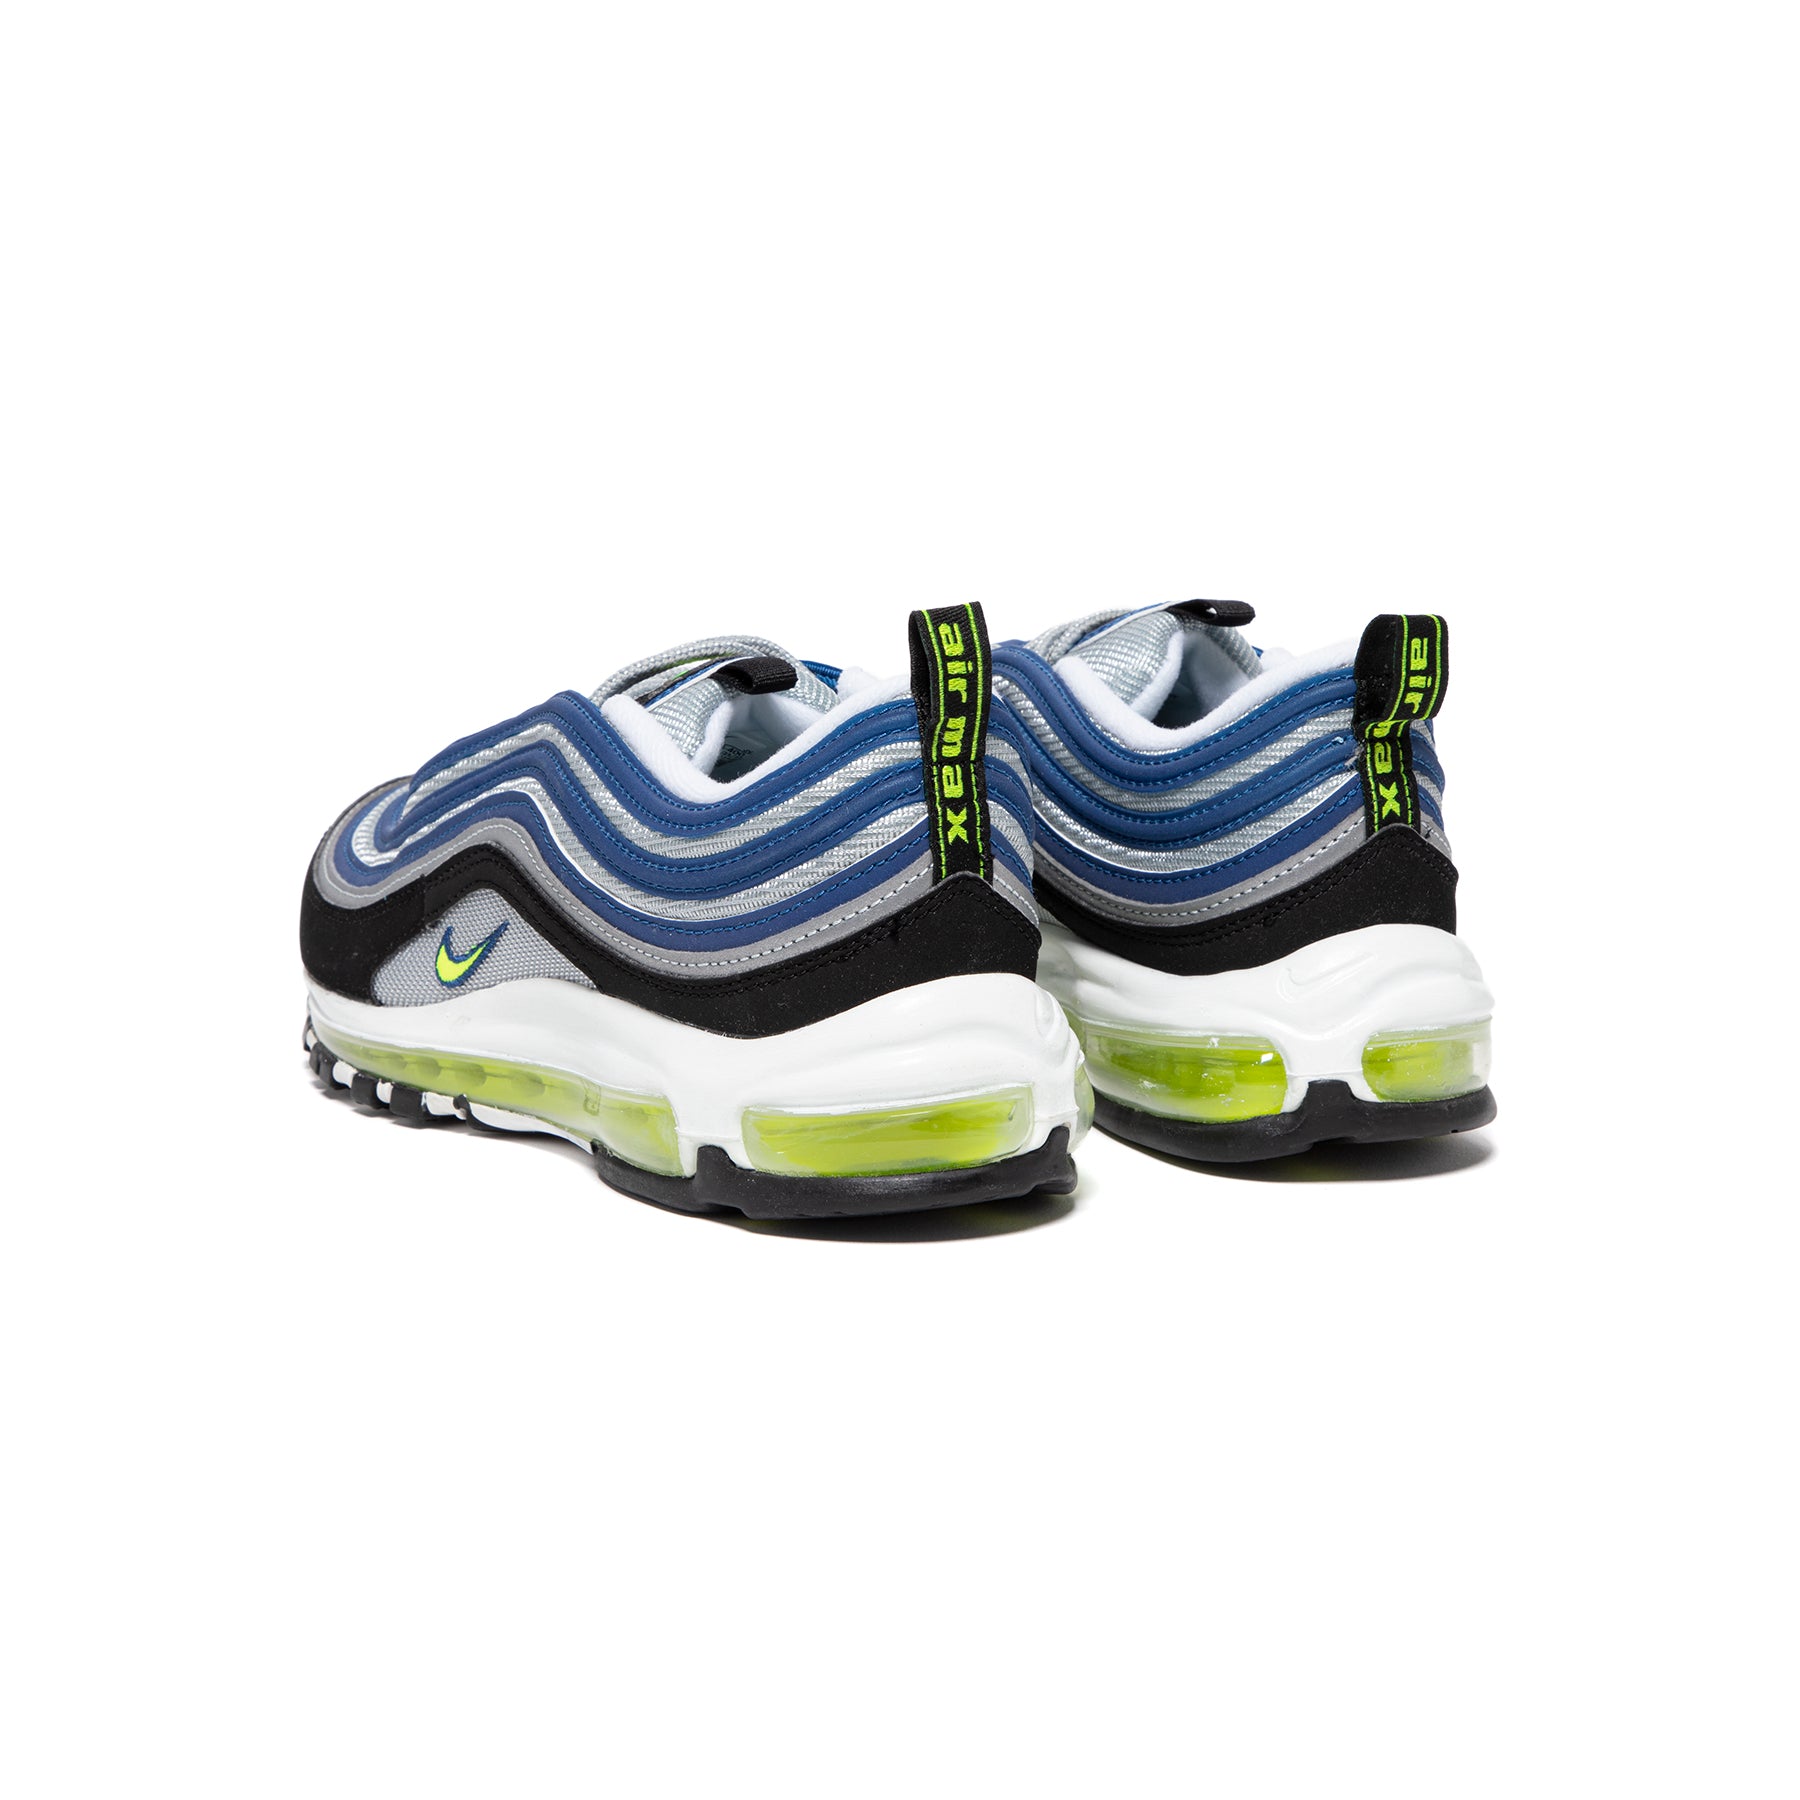 Dental Poder Ambiente Nike Air Max 97 OG (Atlantic Blue/Voltage Yellow) – Concepts